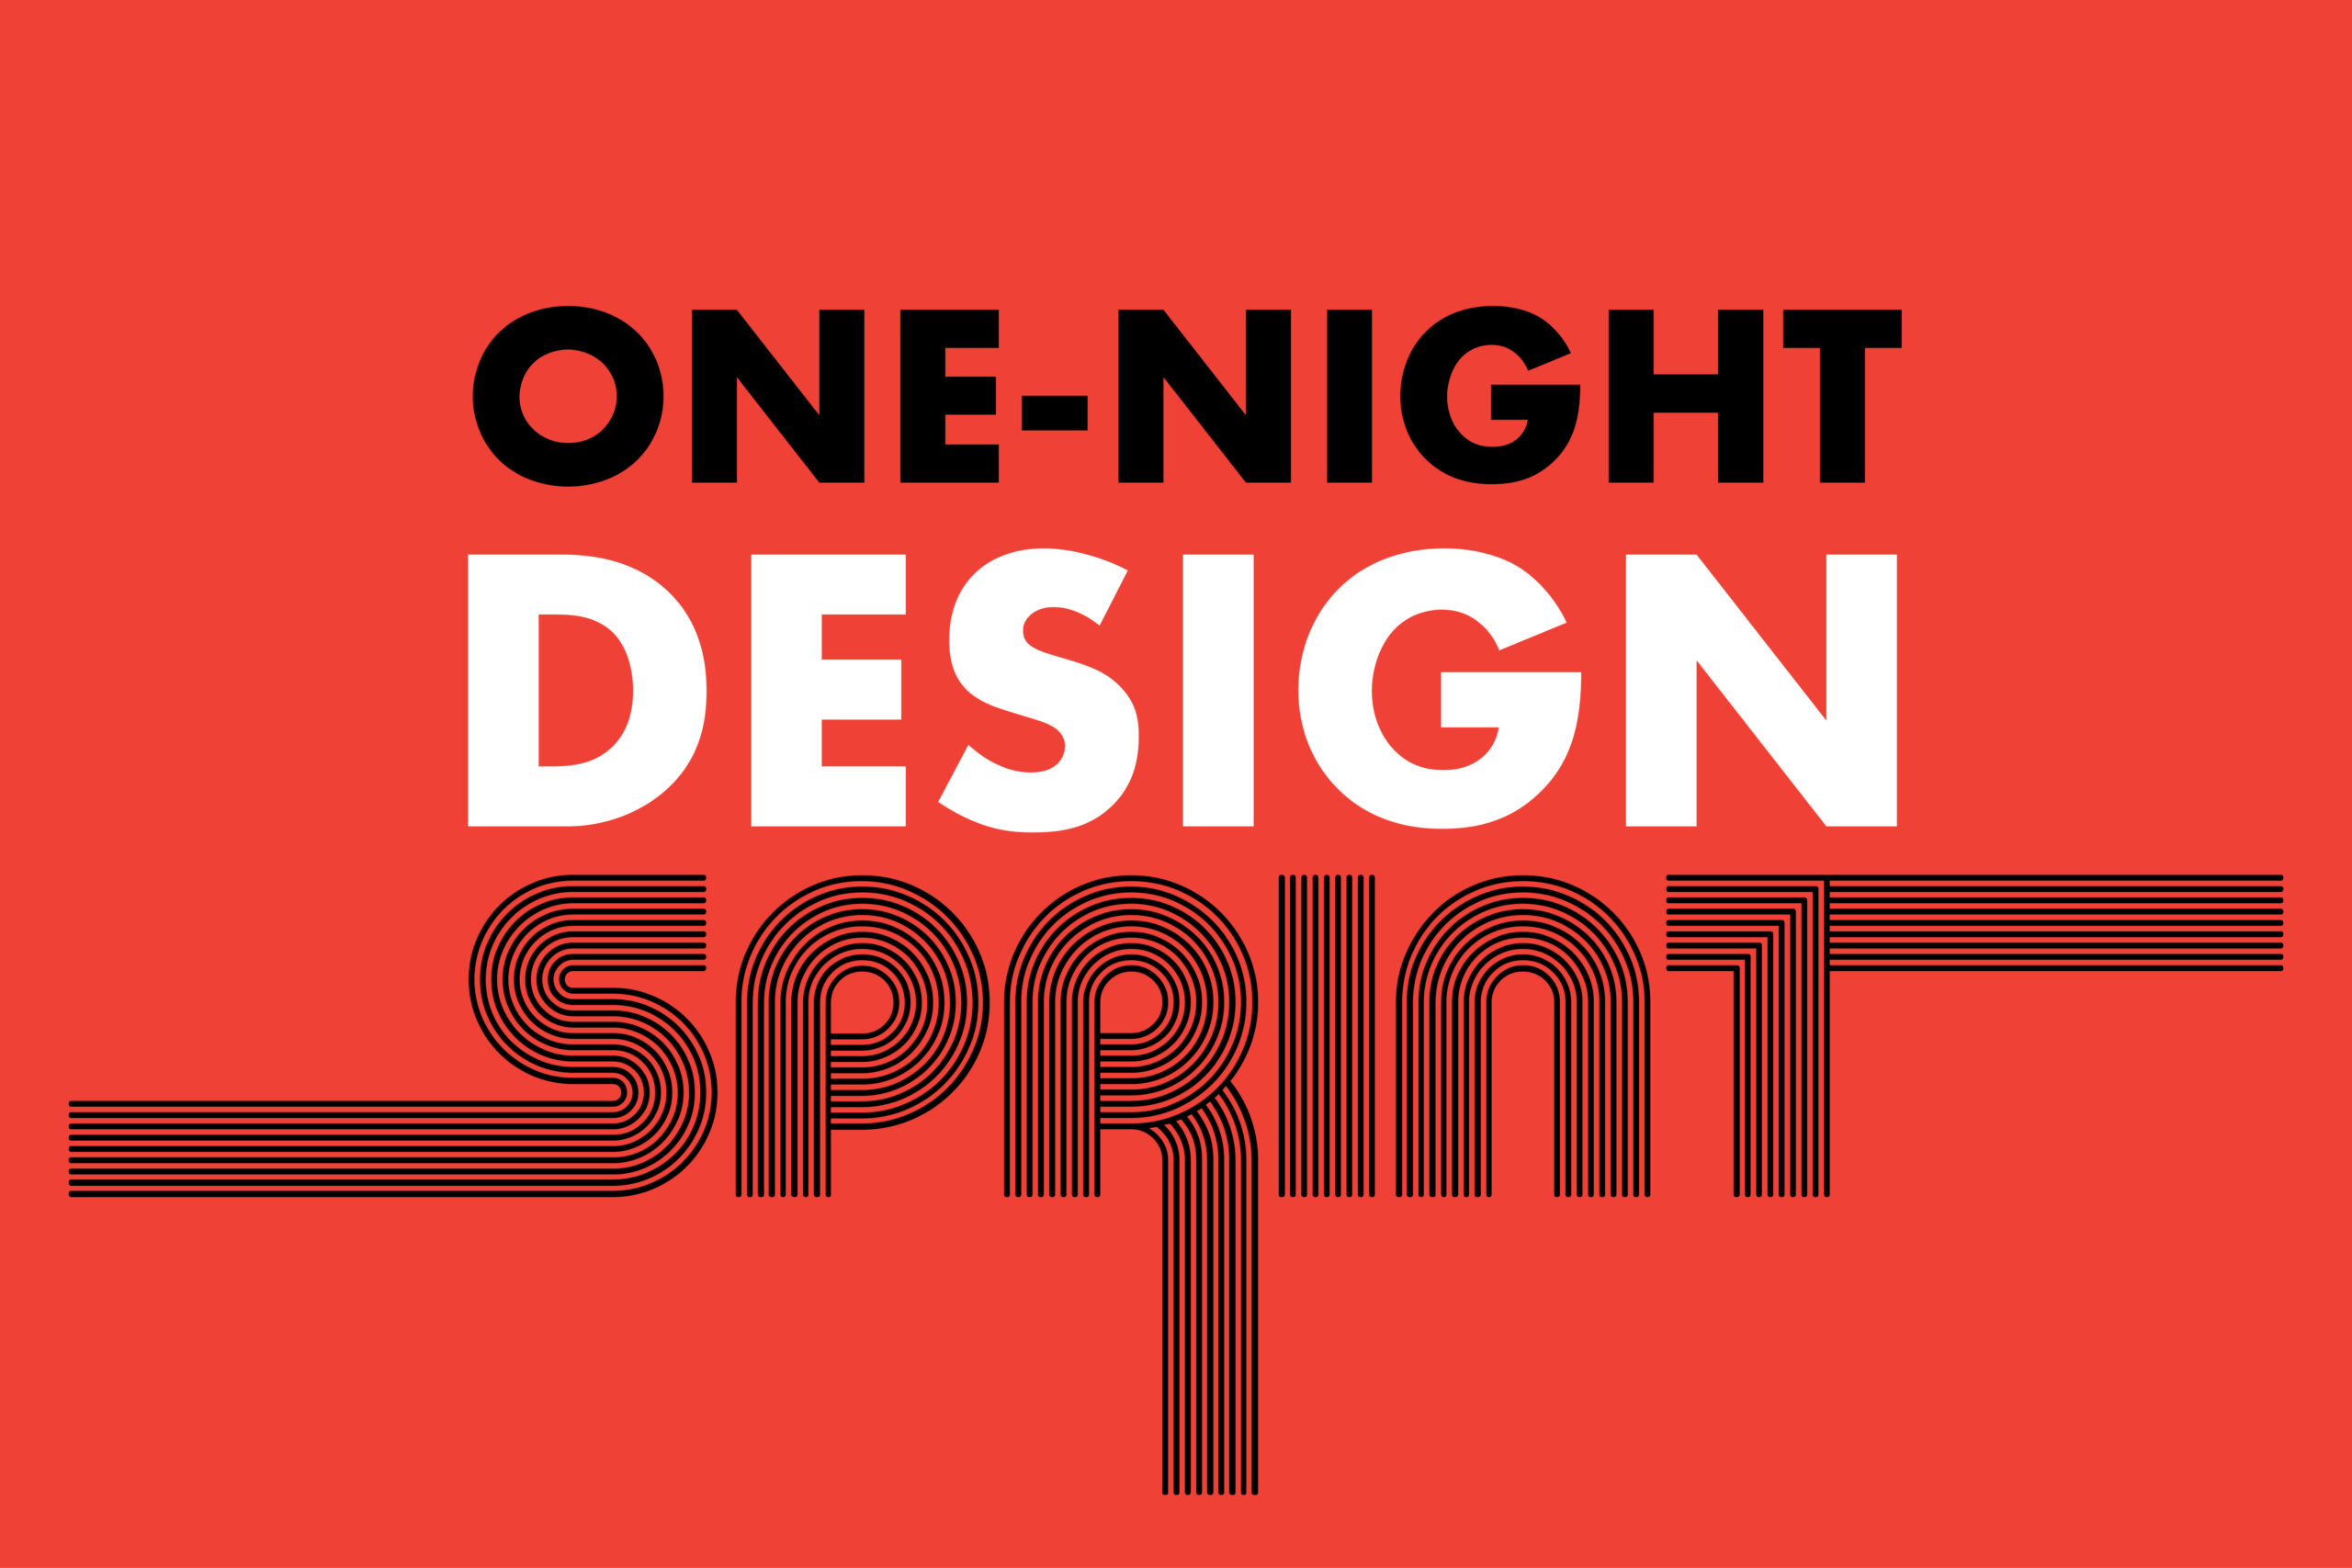 Graphic of the words ONE-NIGHT DESIGN SPRINT against a red background